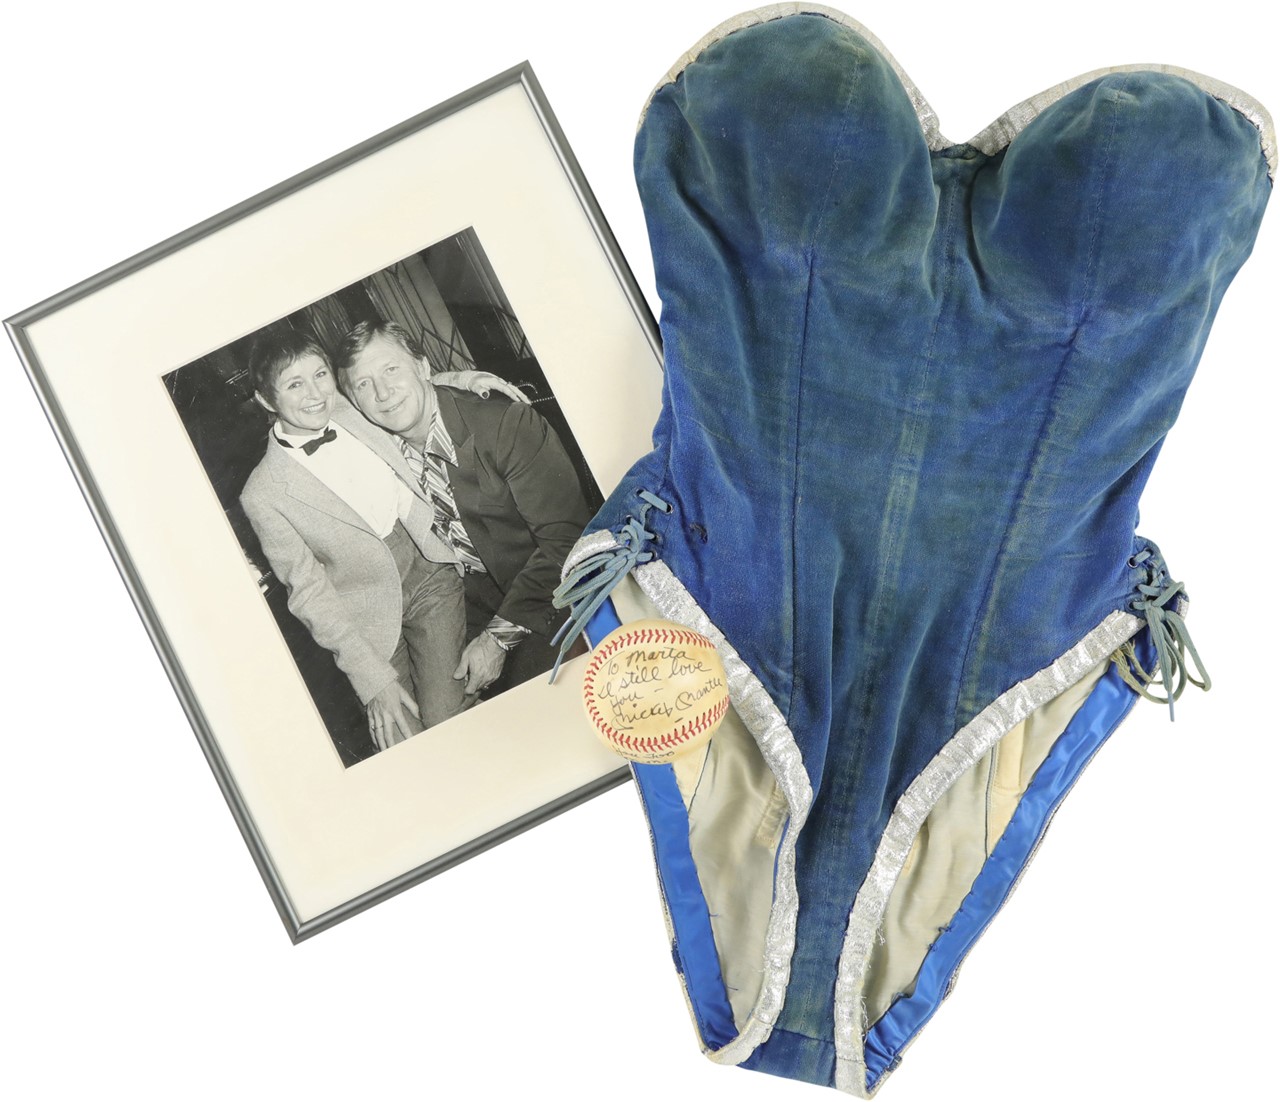 Mantle and Maris - Mickey Mantle Signed "I Still Love You" Baseball to Playboy Bunny Ex-Girlfriend with Bunny Suit and Impeccable Provenance (Photo-Match)